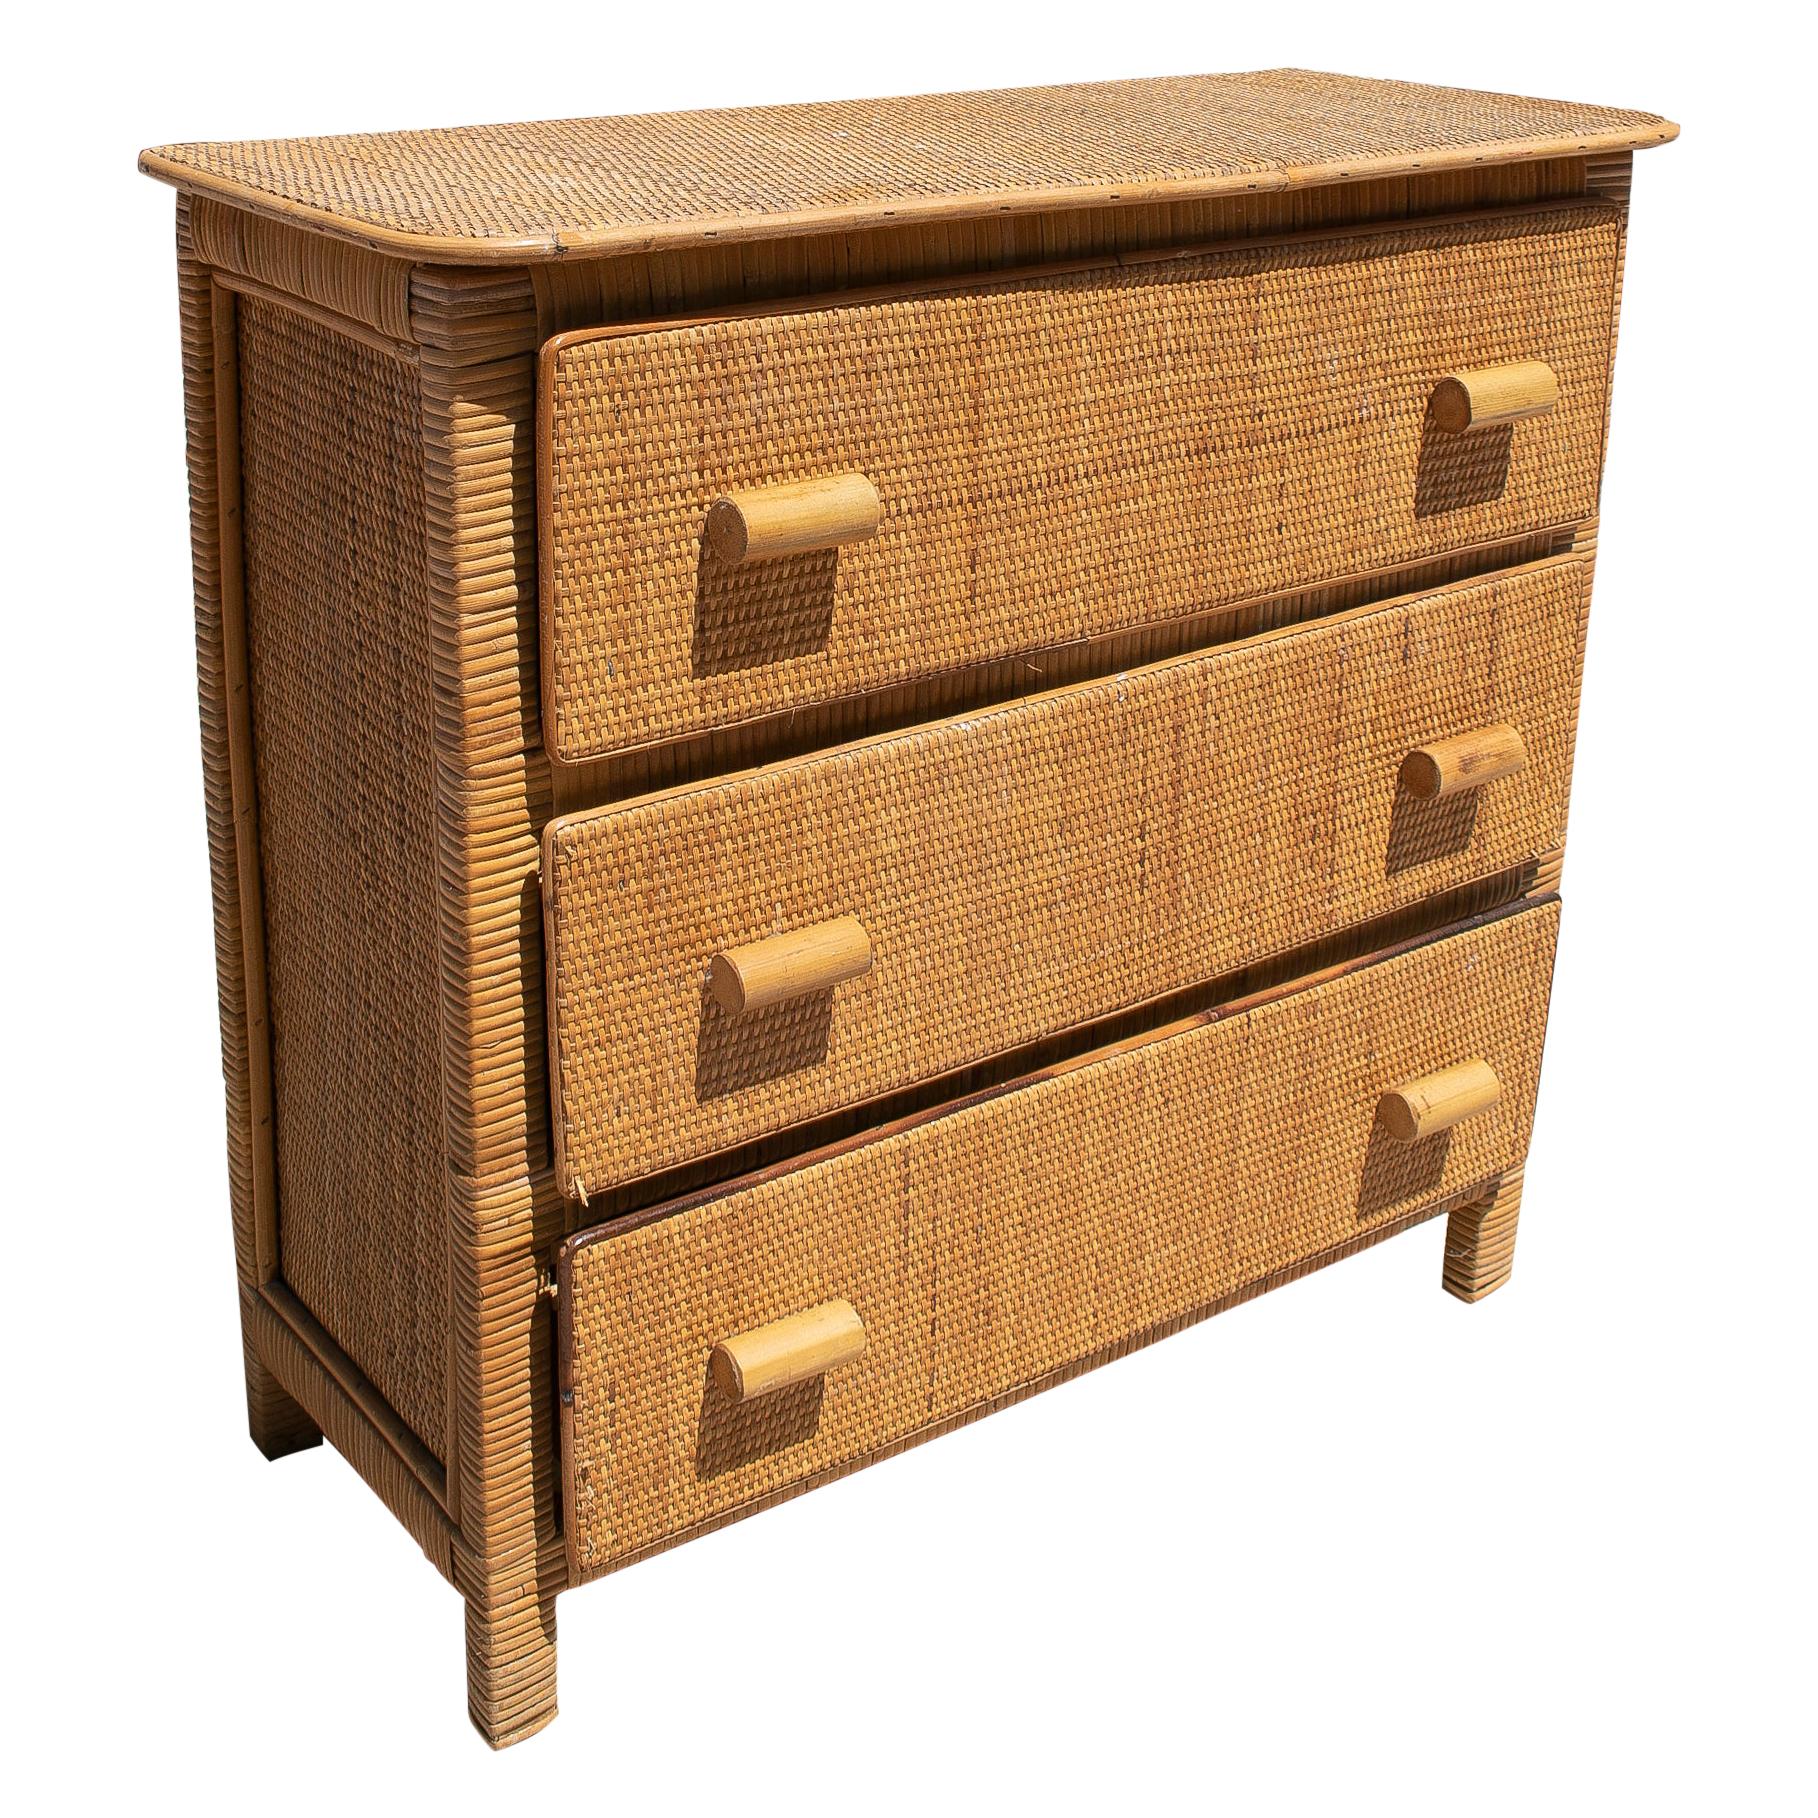 1970s Spanish Hand Woven Lace Wicker 3-Drawer Commode Chest For Sale